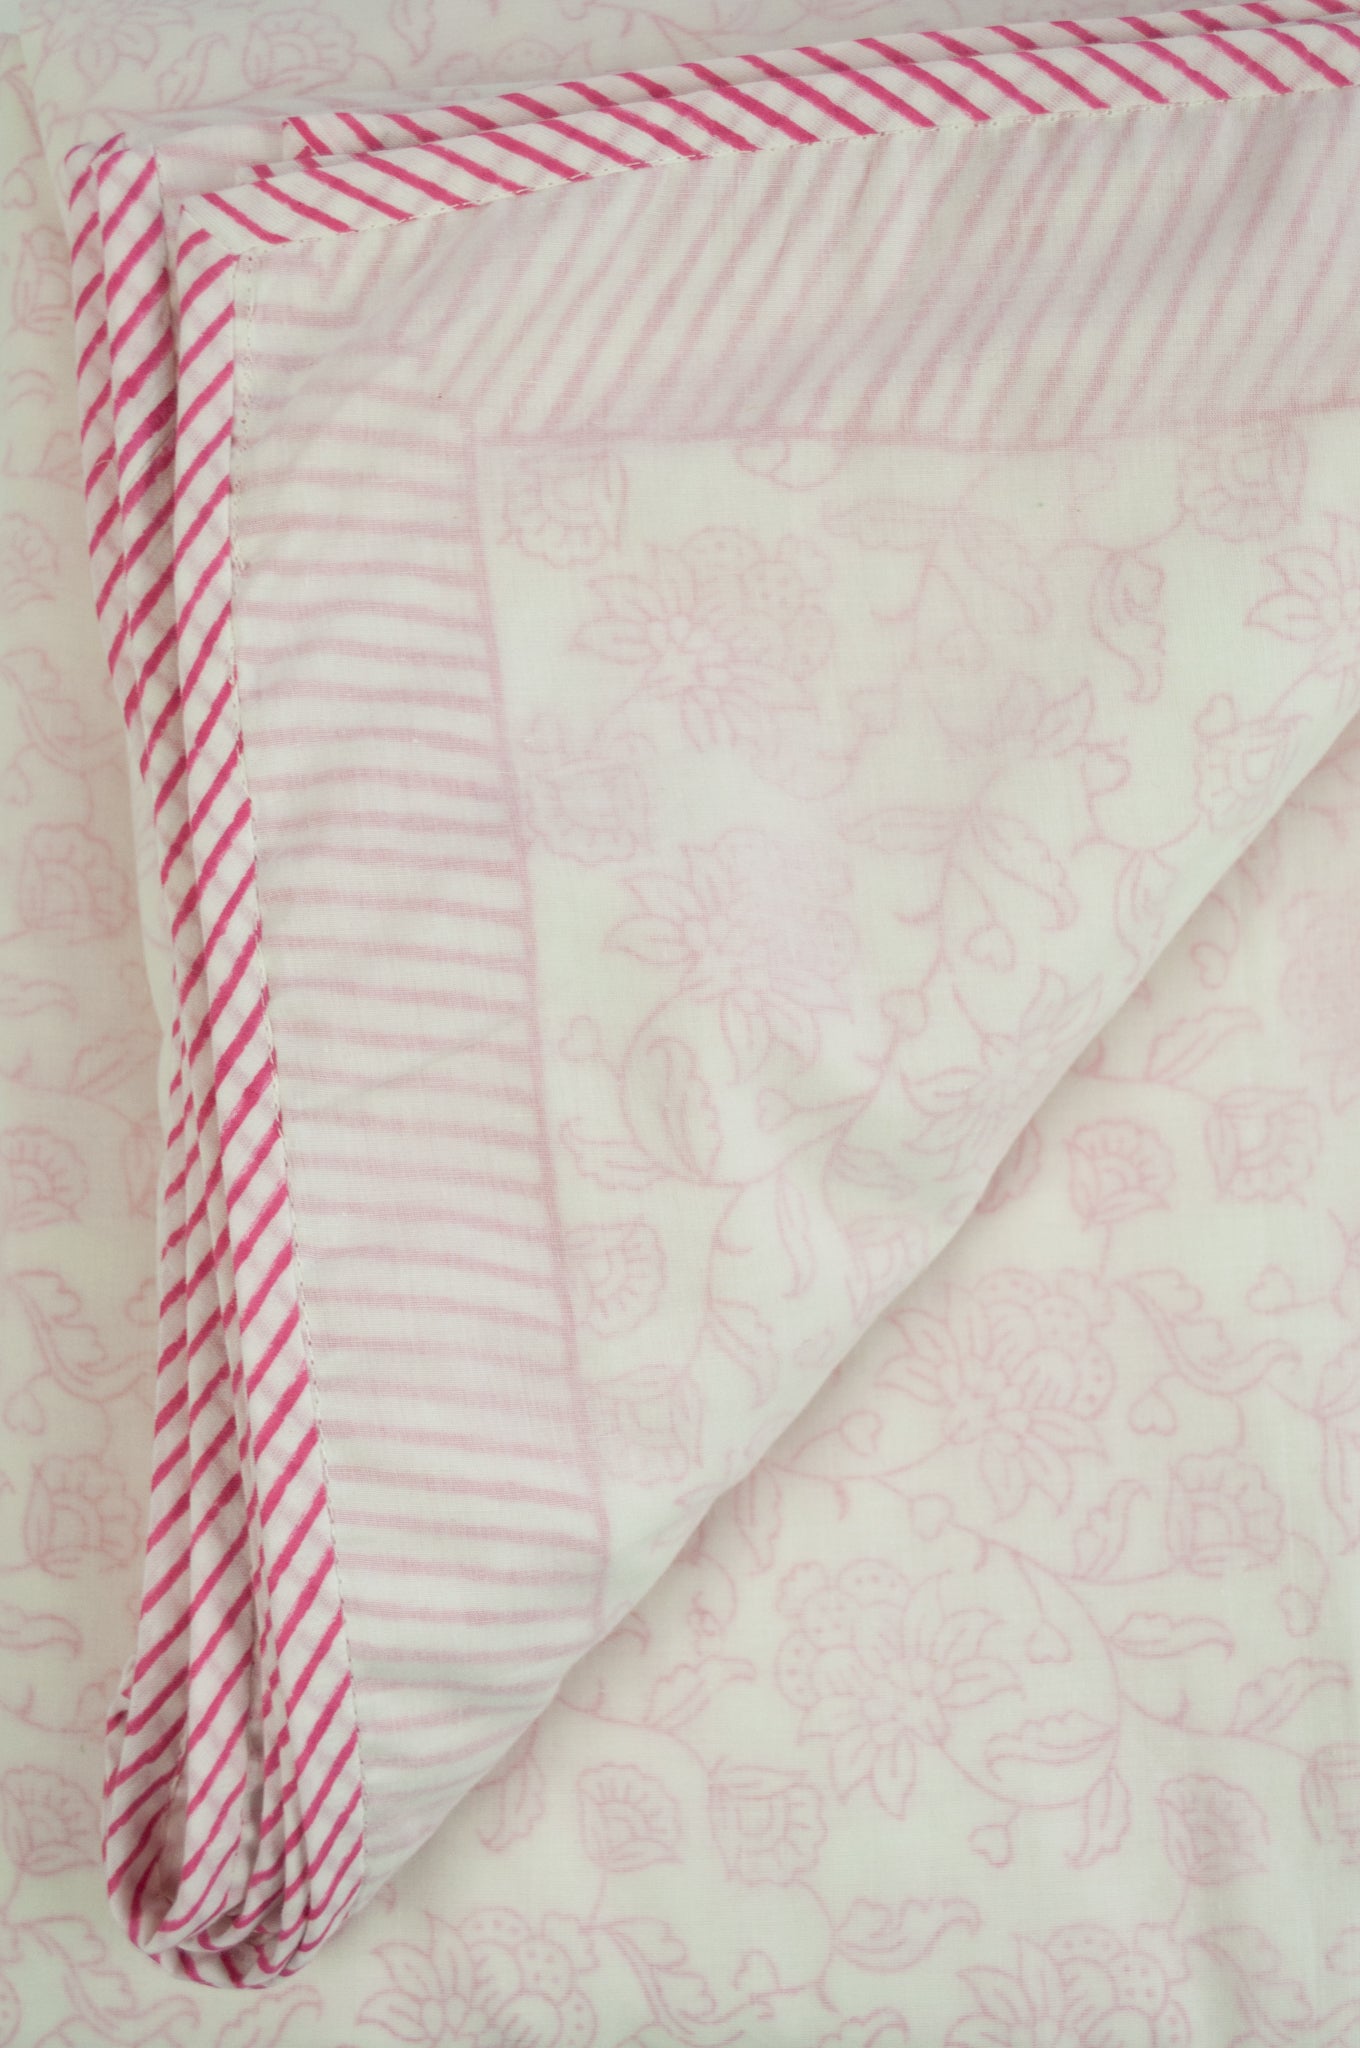 Summer quilt dohar lightweight muslin cotton voile quilt, block printed three layers, rose pink floral print on white with striped border.